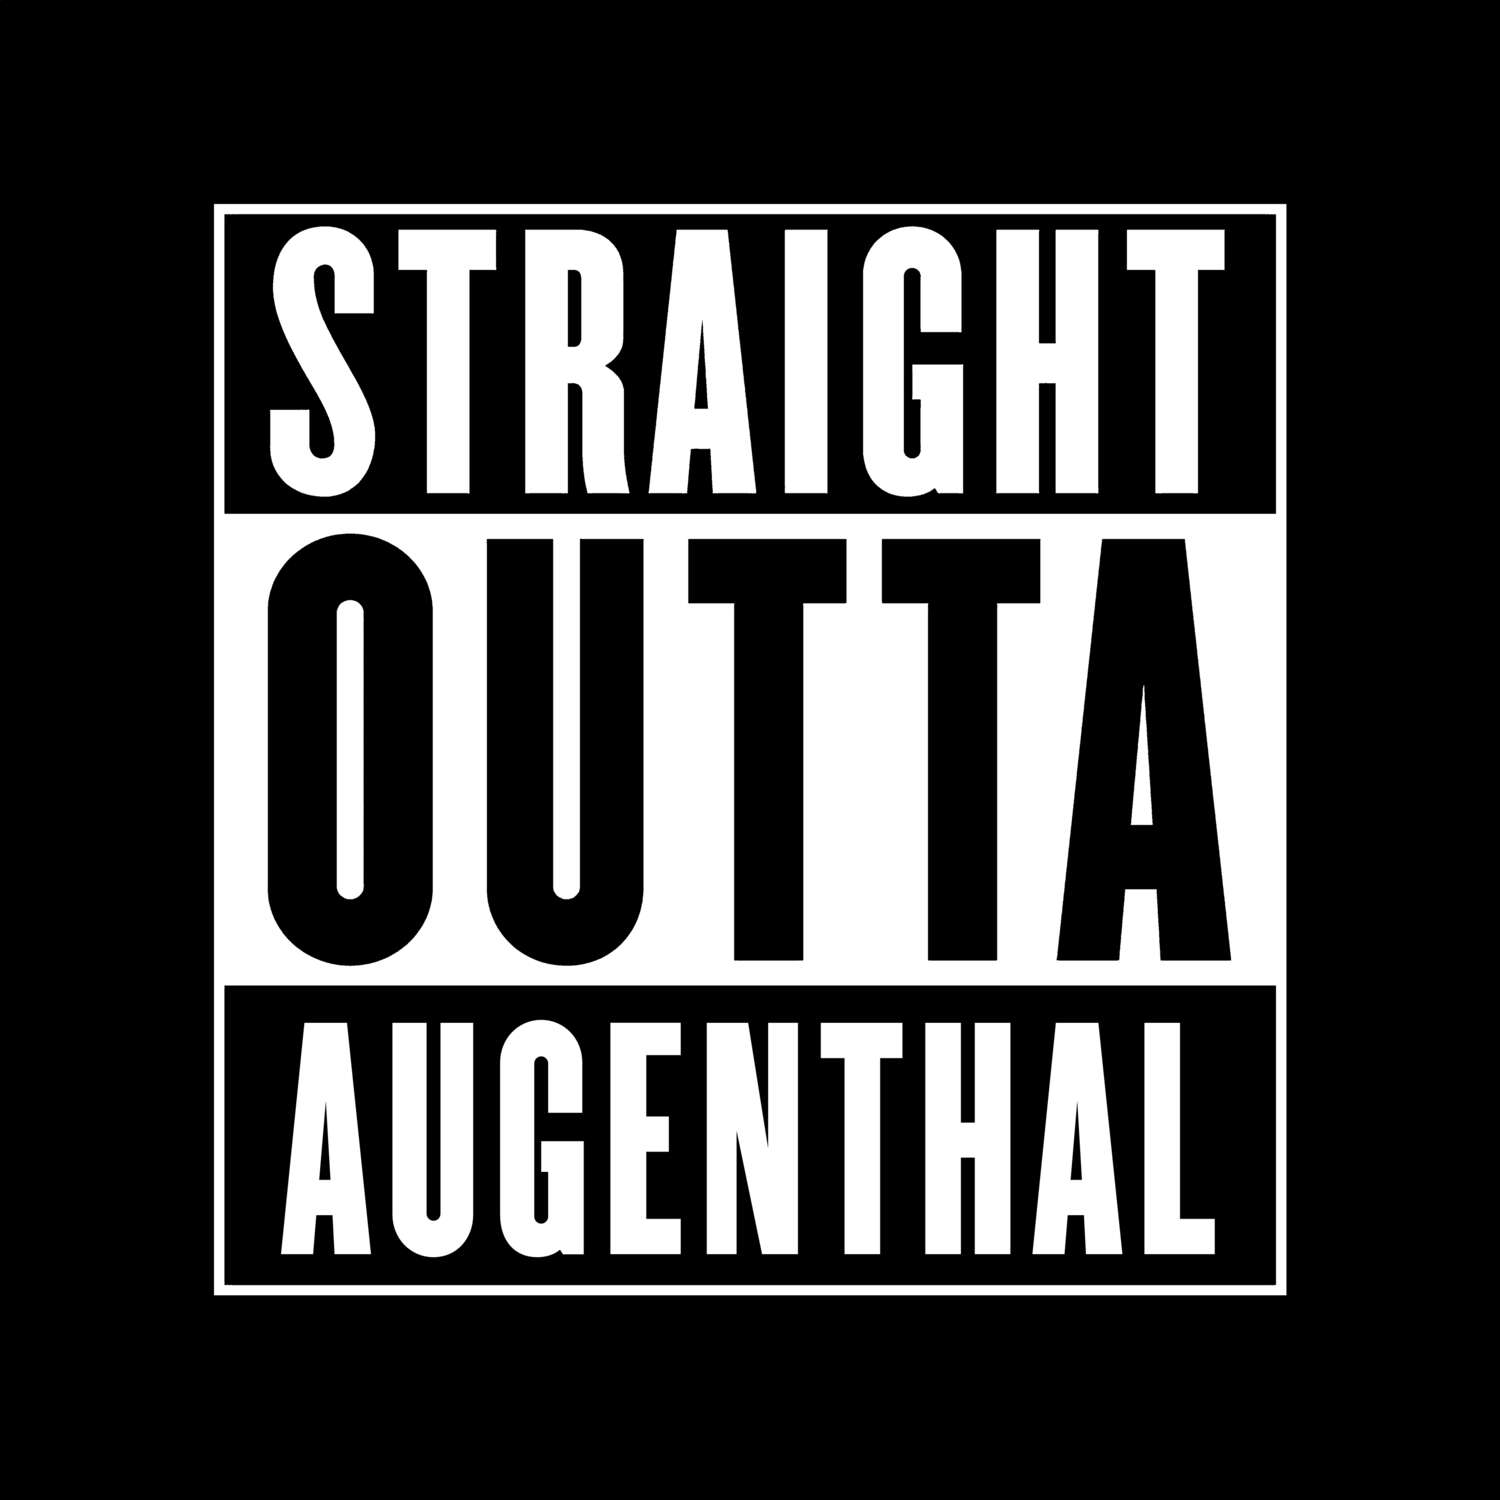 Augenthal T-Shirt »Straight Outta«